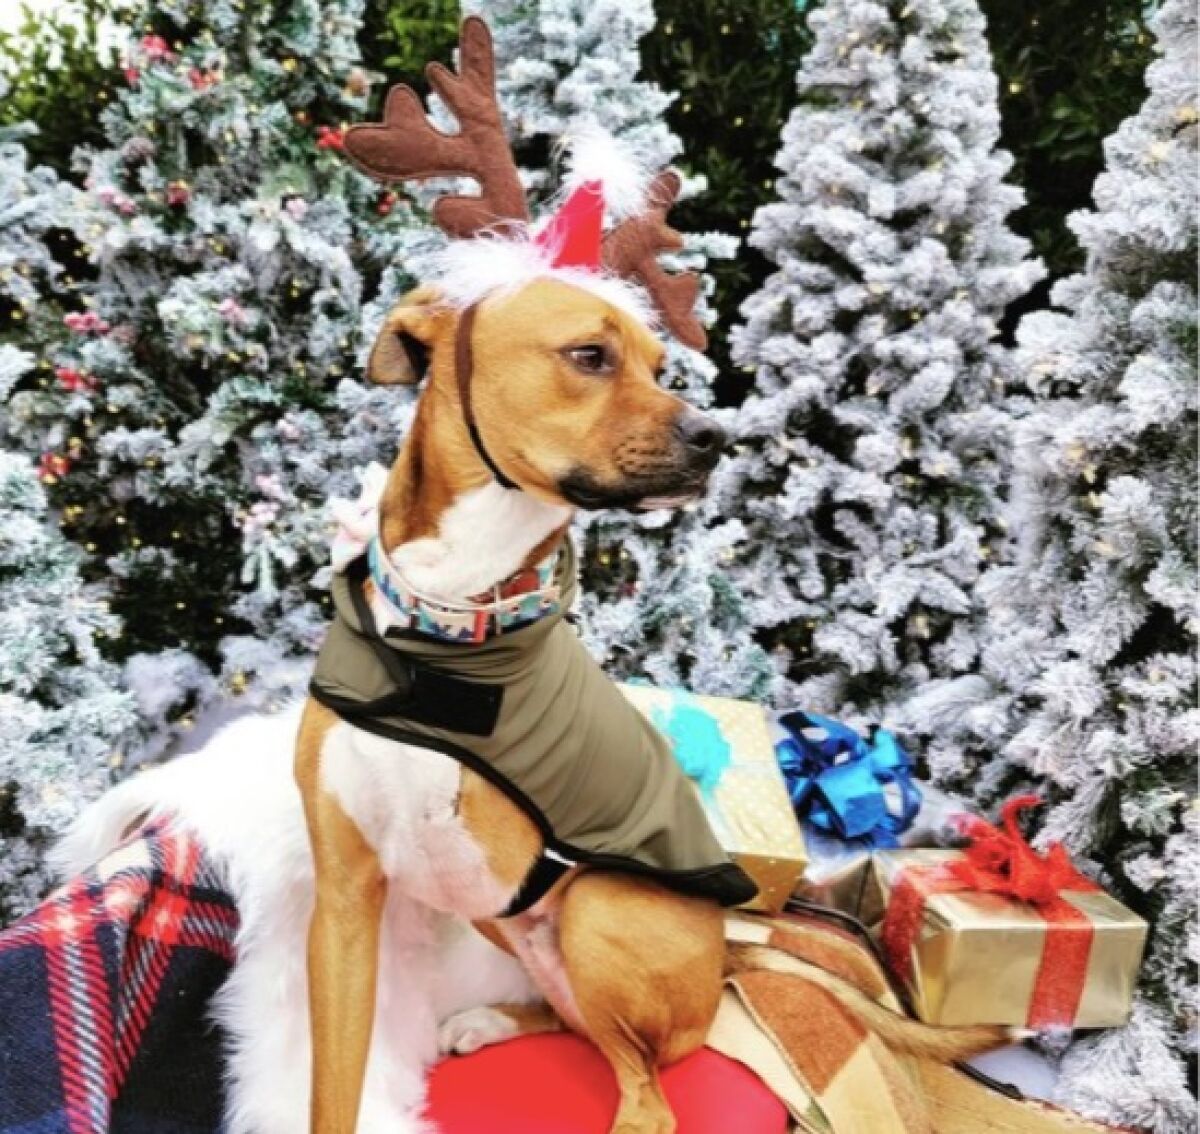 Aspen, a 2-year-old rescued boxer mix, donned antlers to host his Winter Wonderland display and holiday giveaway in La Jolla.